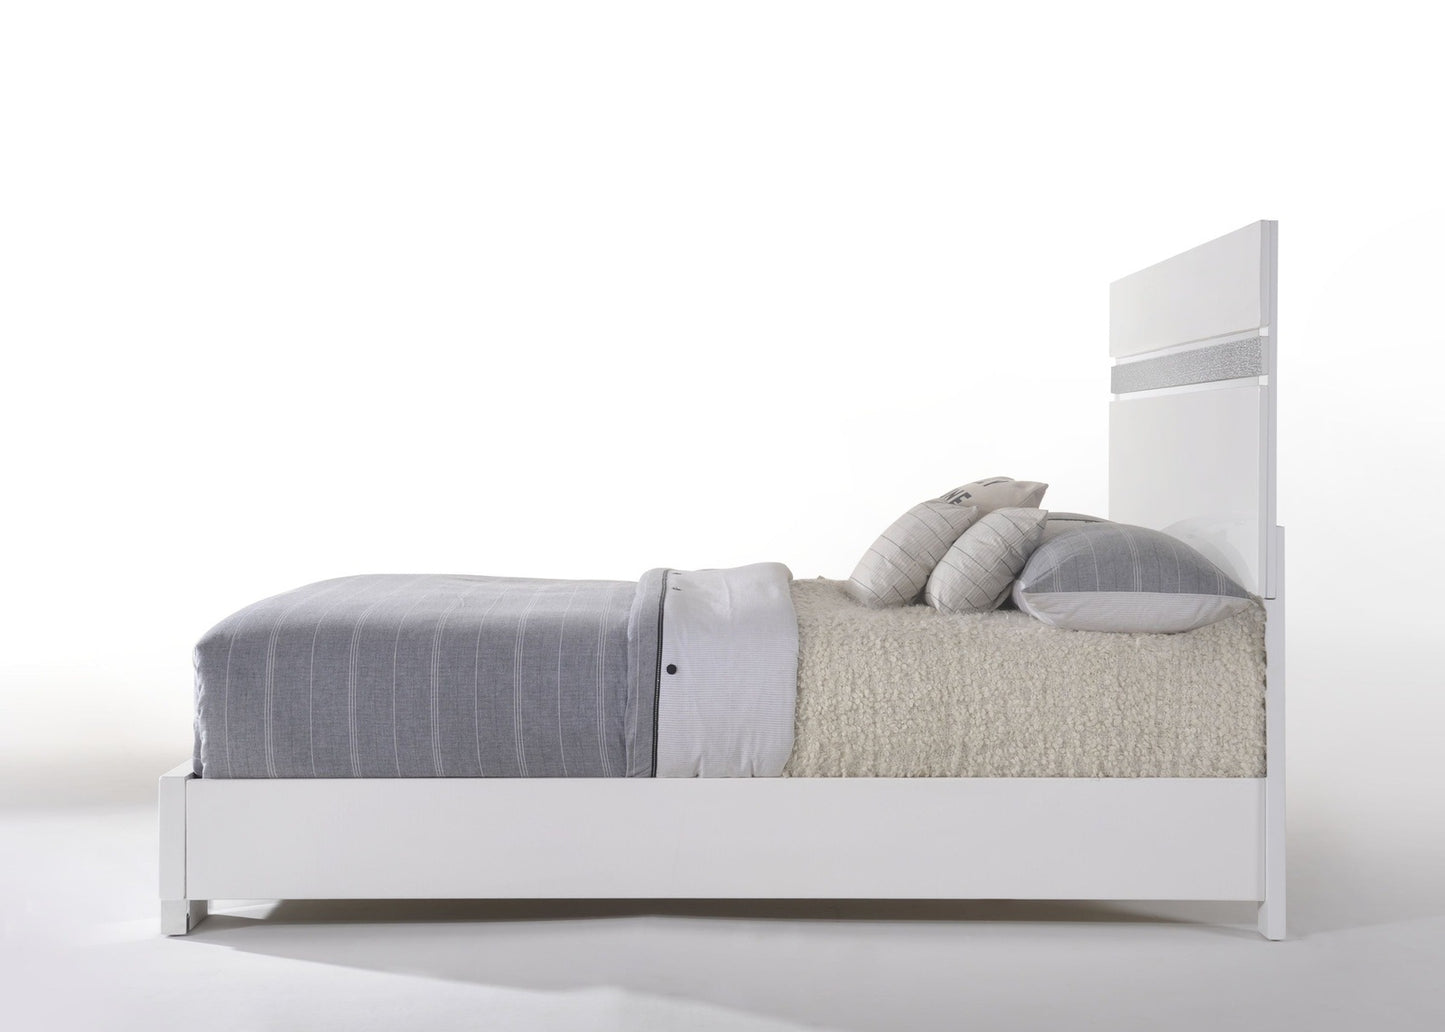 Naima II Queen Bed in White with Contrasting Gray